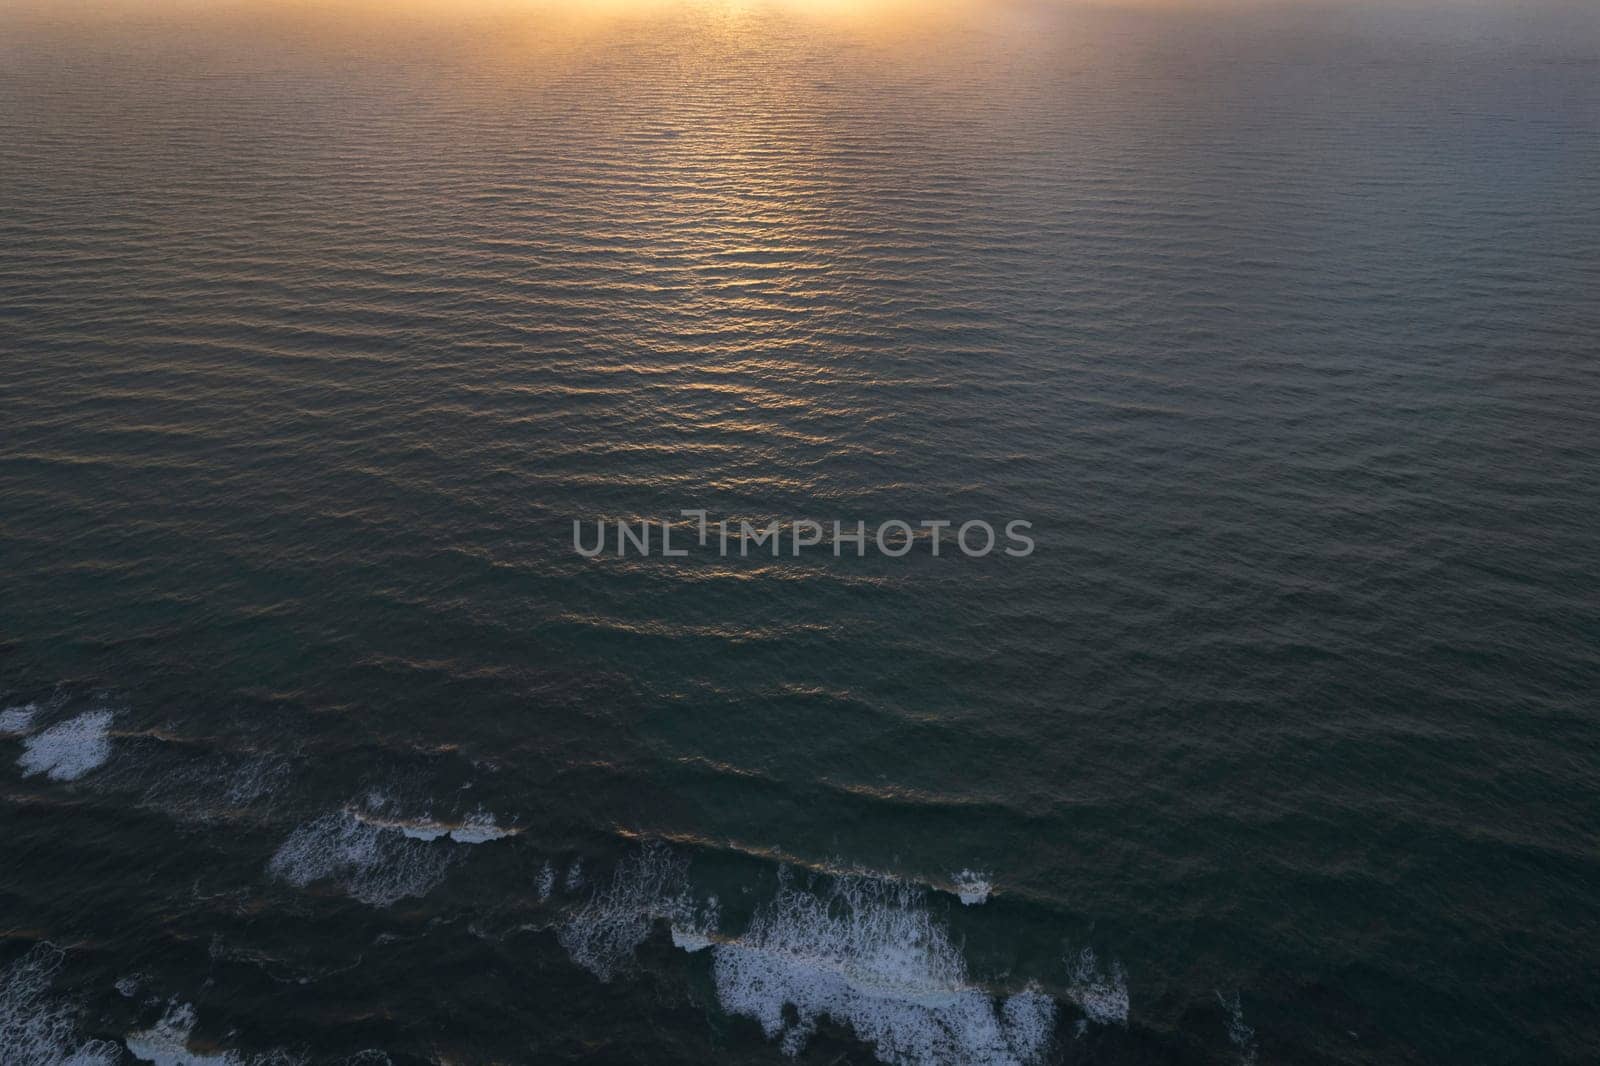 Aerial view of a sunset over the Mediterranean sea by fotografiche.eu